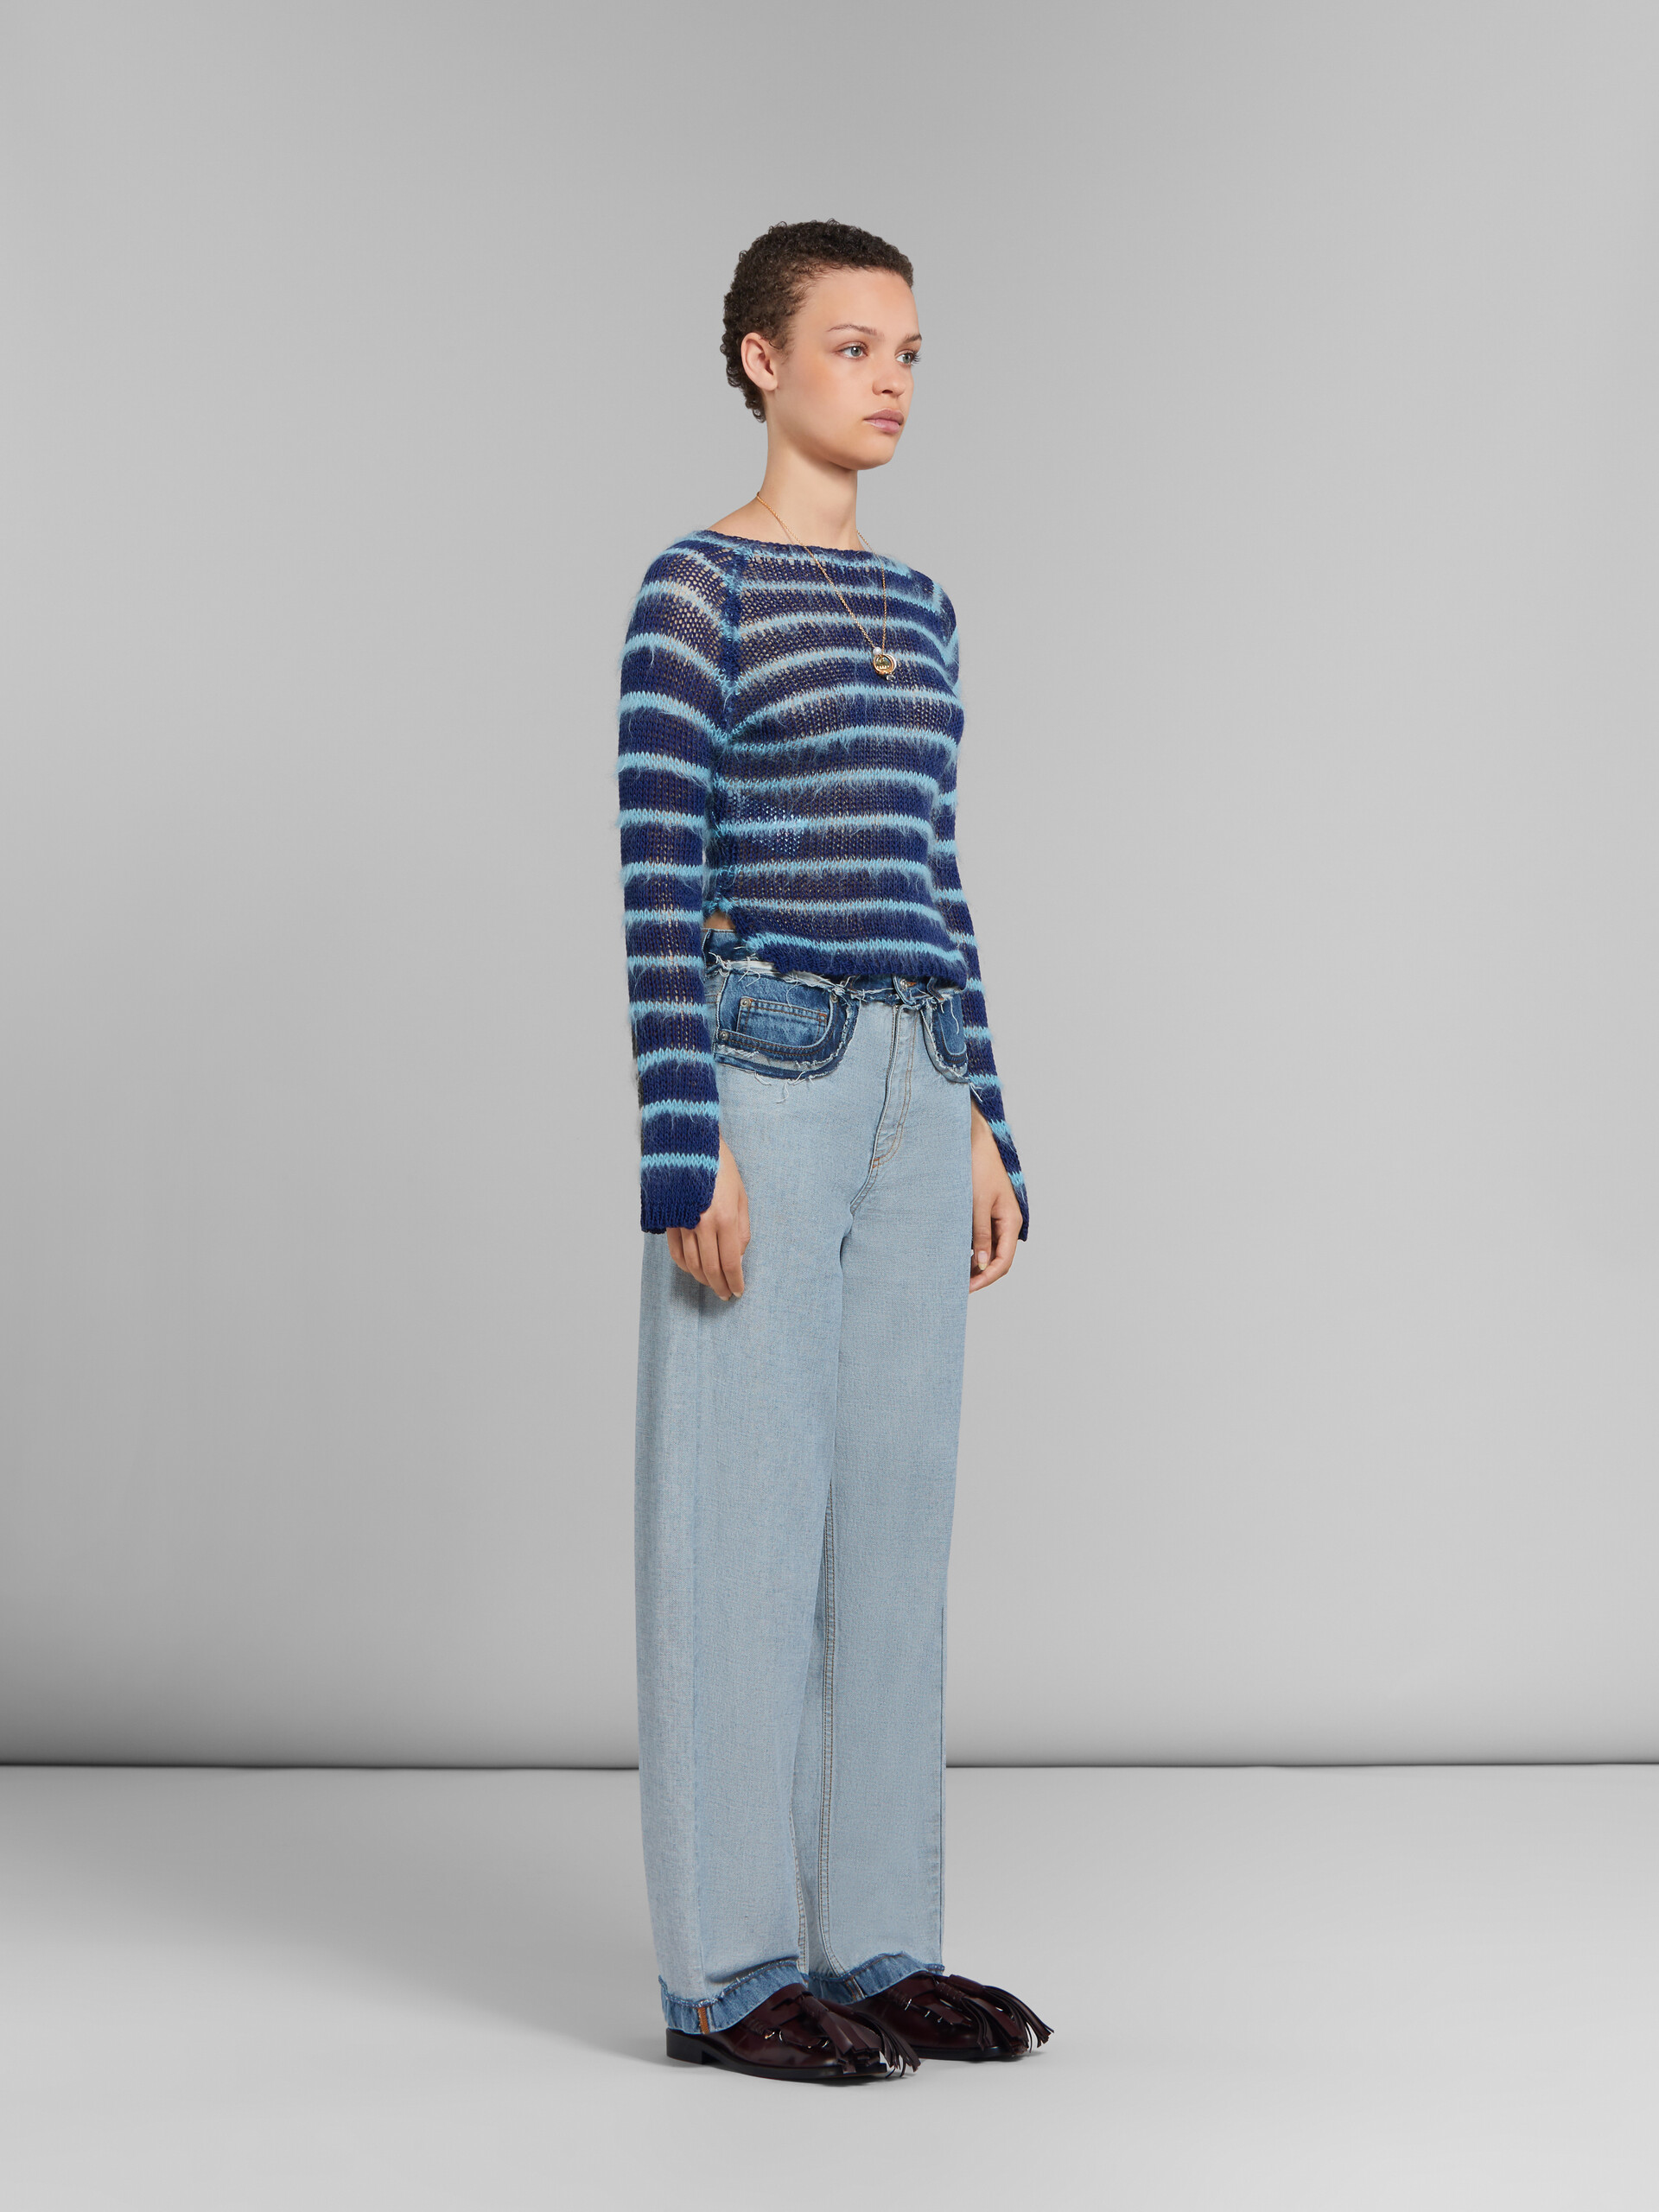 Blue boat-neck jumper with mohair stripes - Pullovers - Image 5